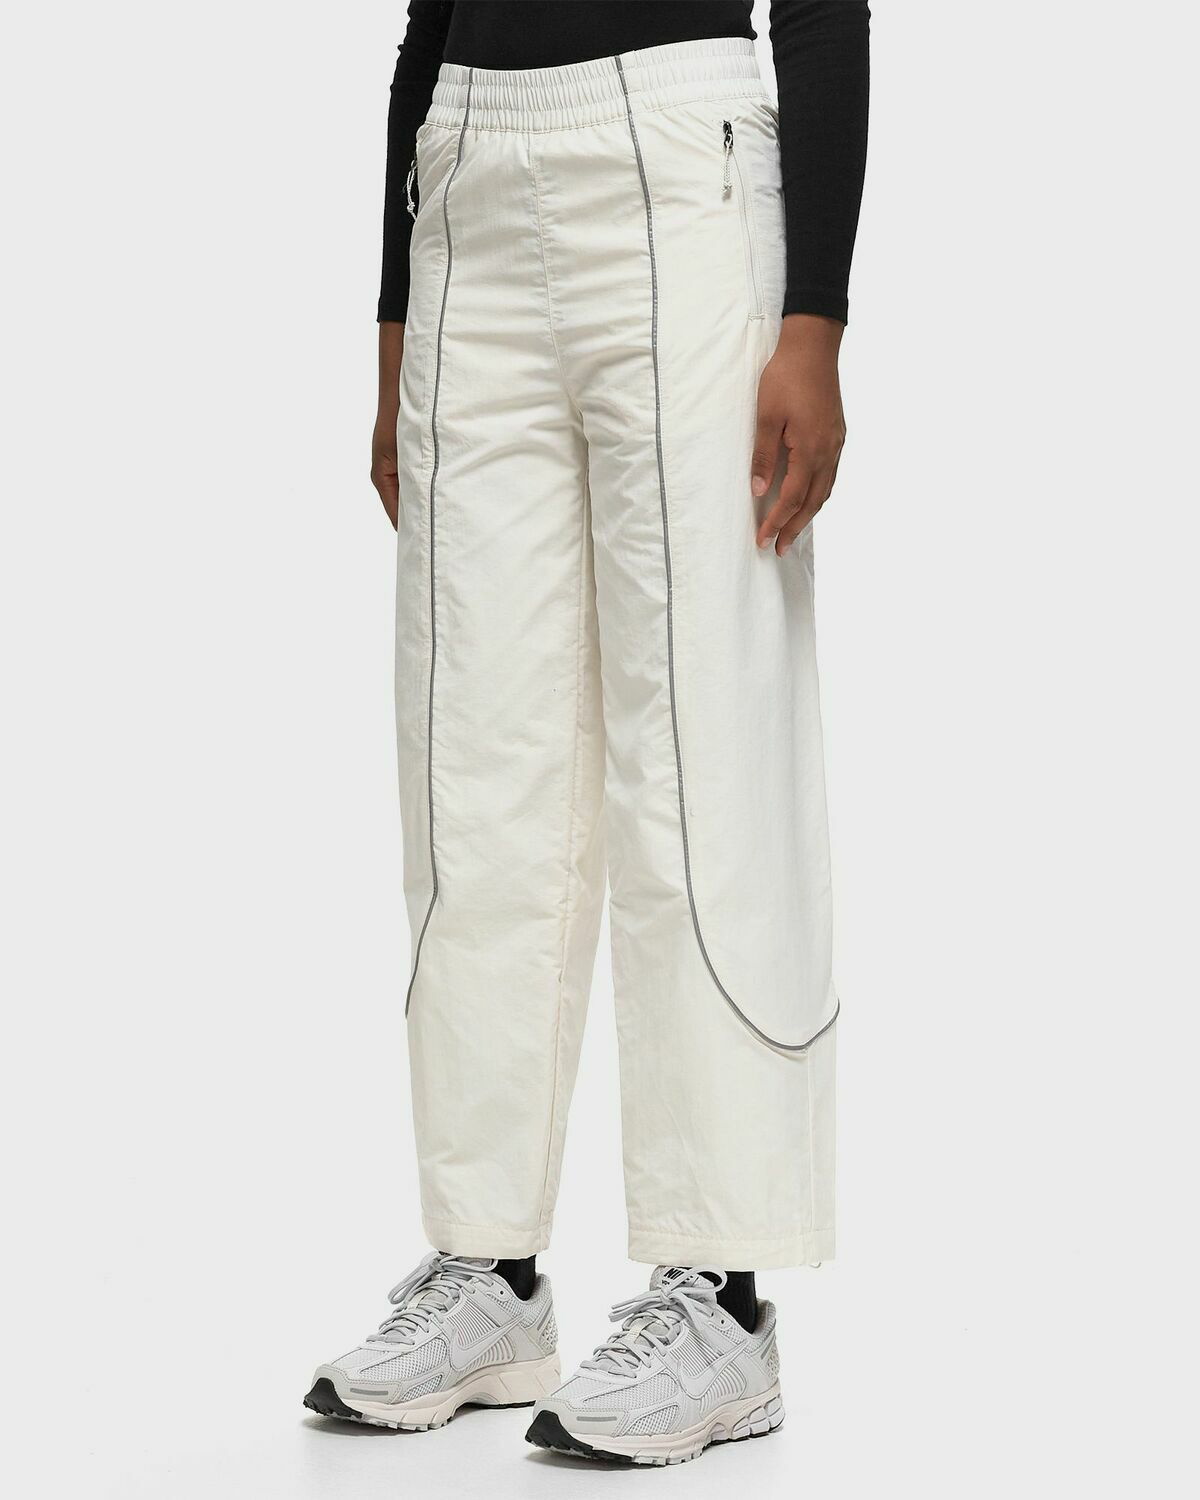 The North Face Women’s Tek Piping Wind Pant White - Womens - Sweatpants